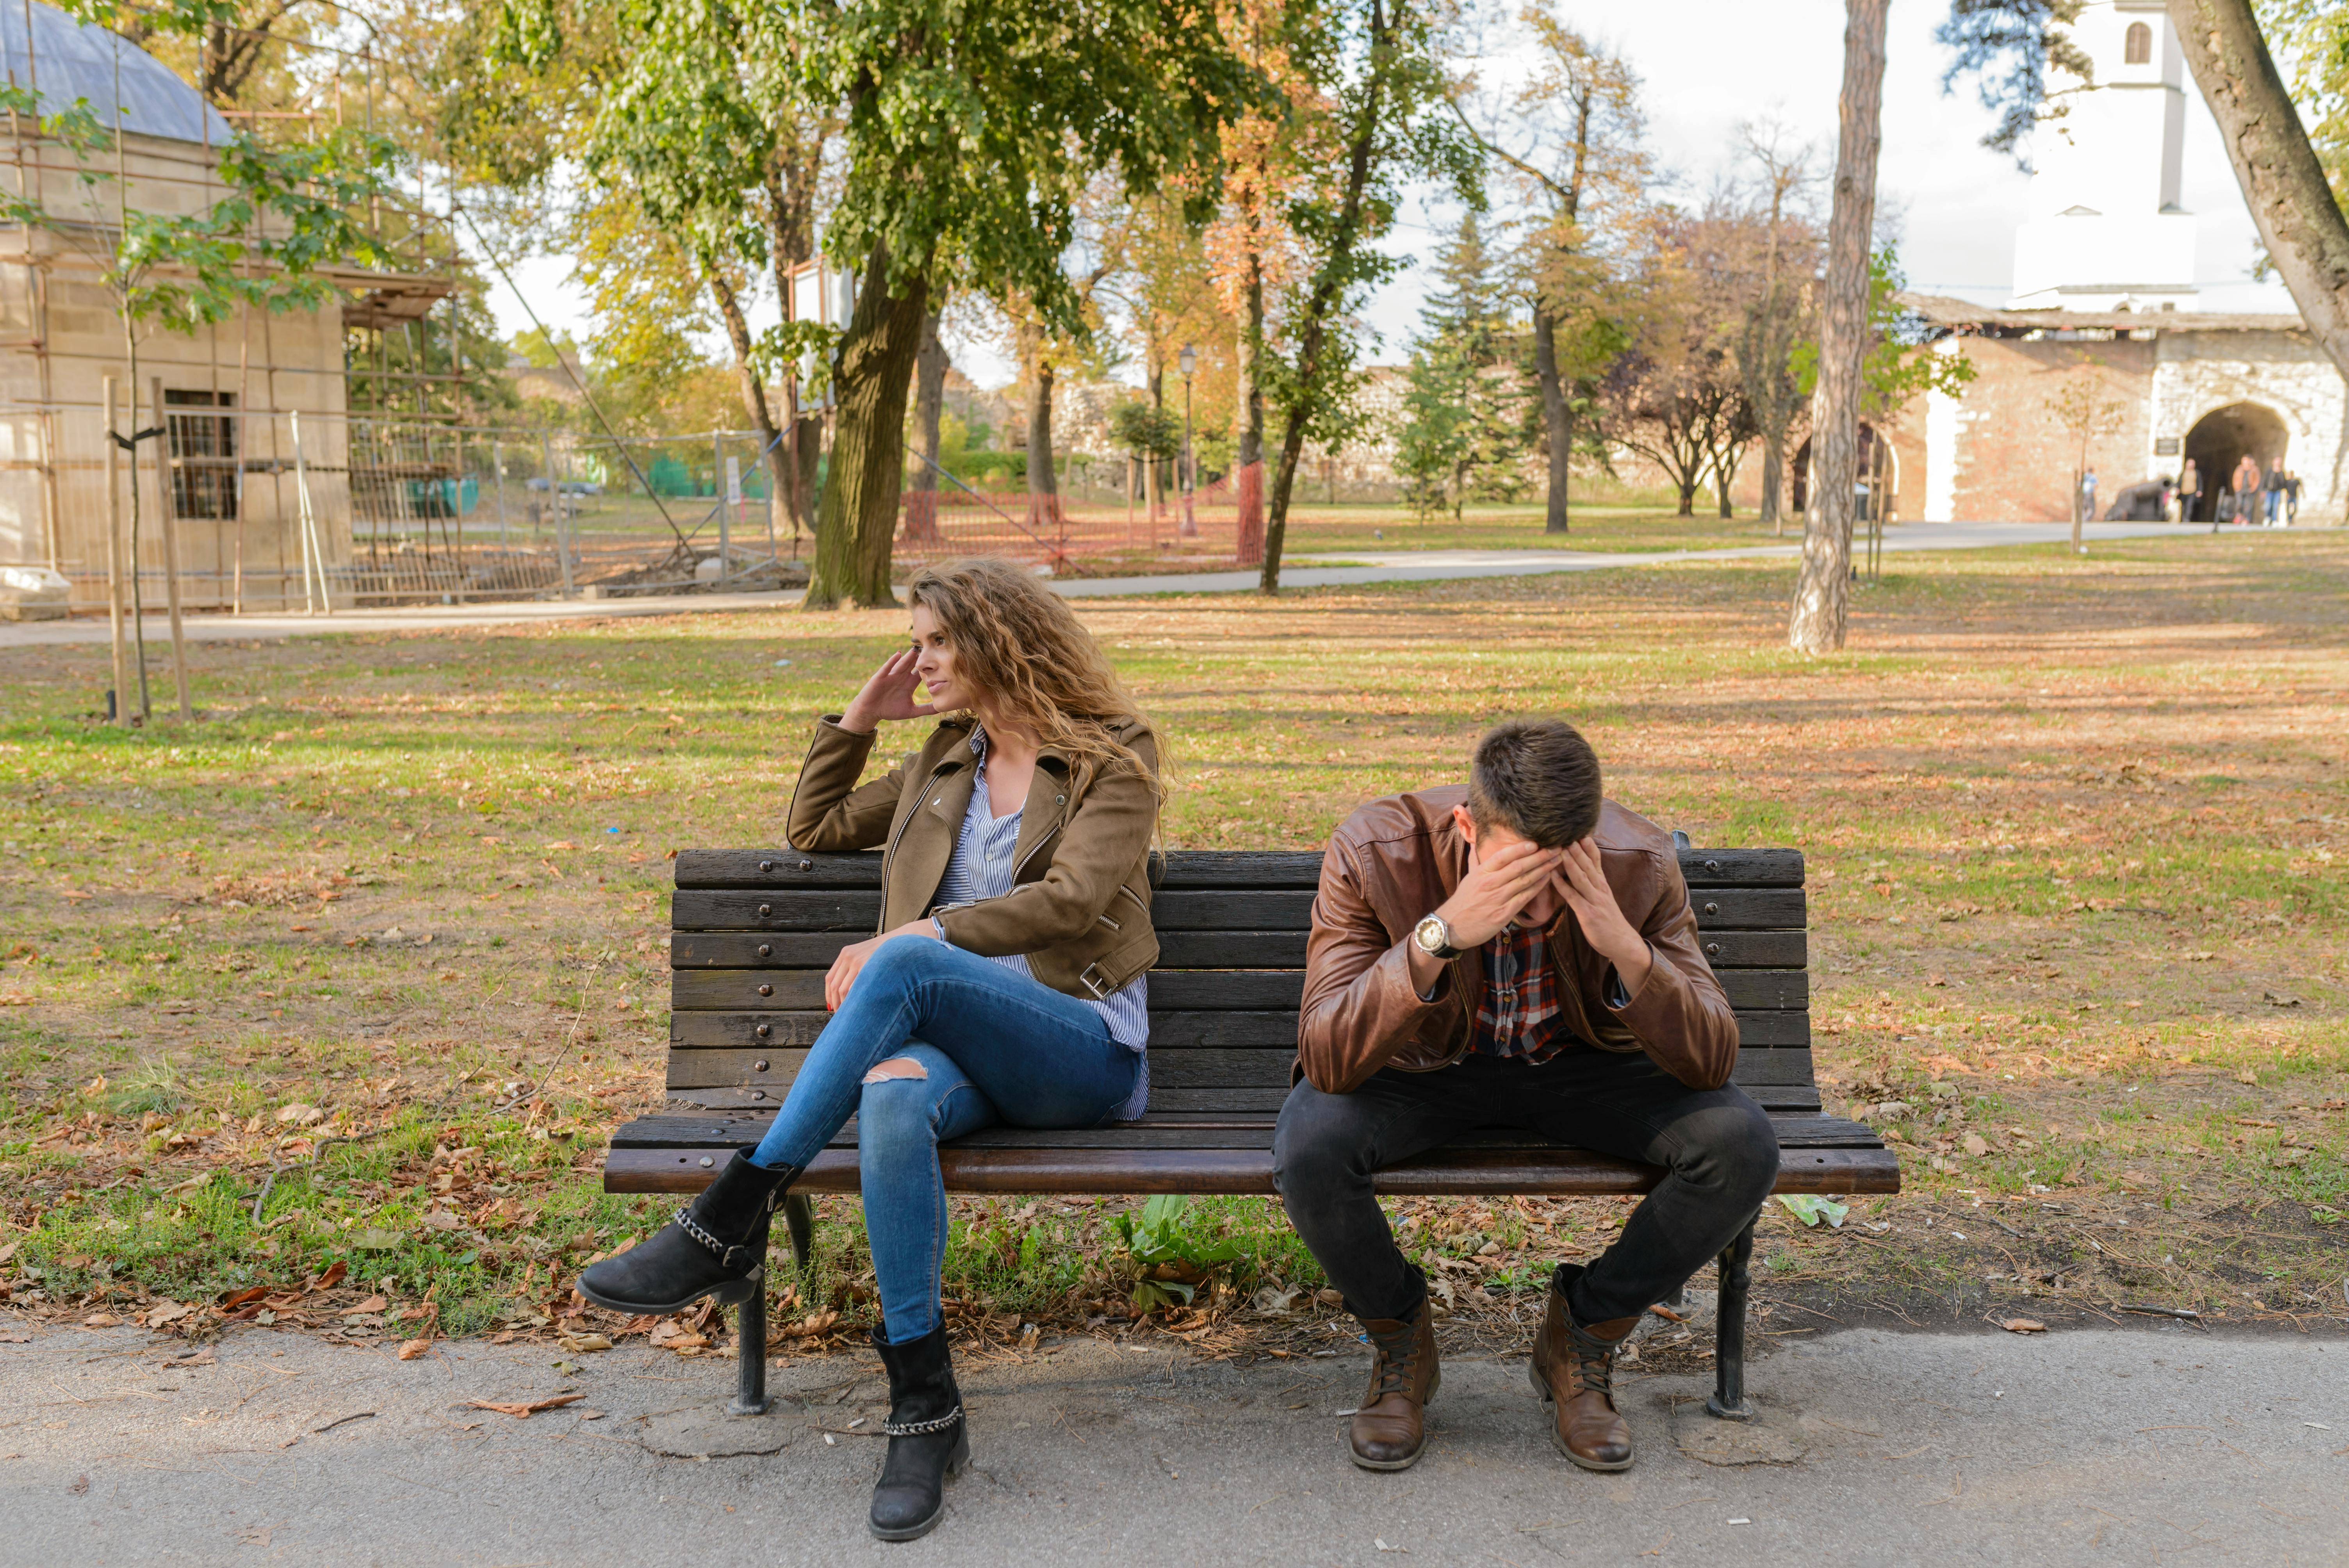 An unhappy couple sitting on a park bench | Source: Pexels